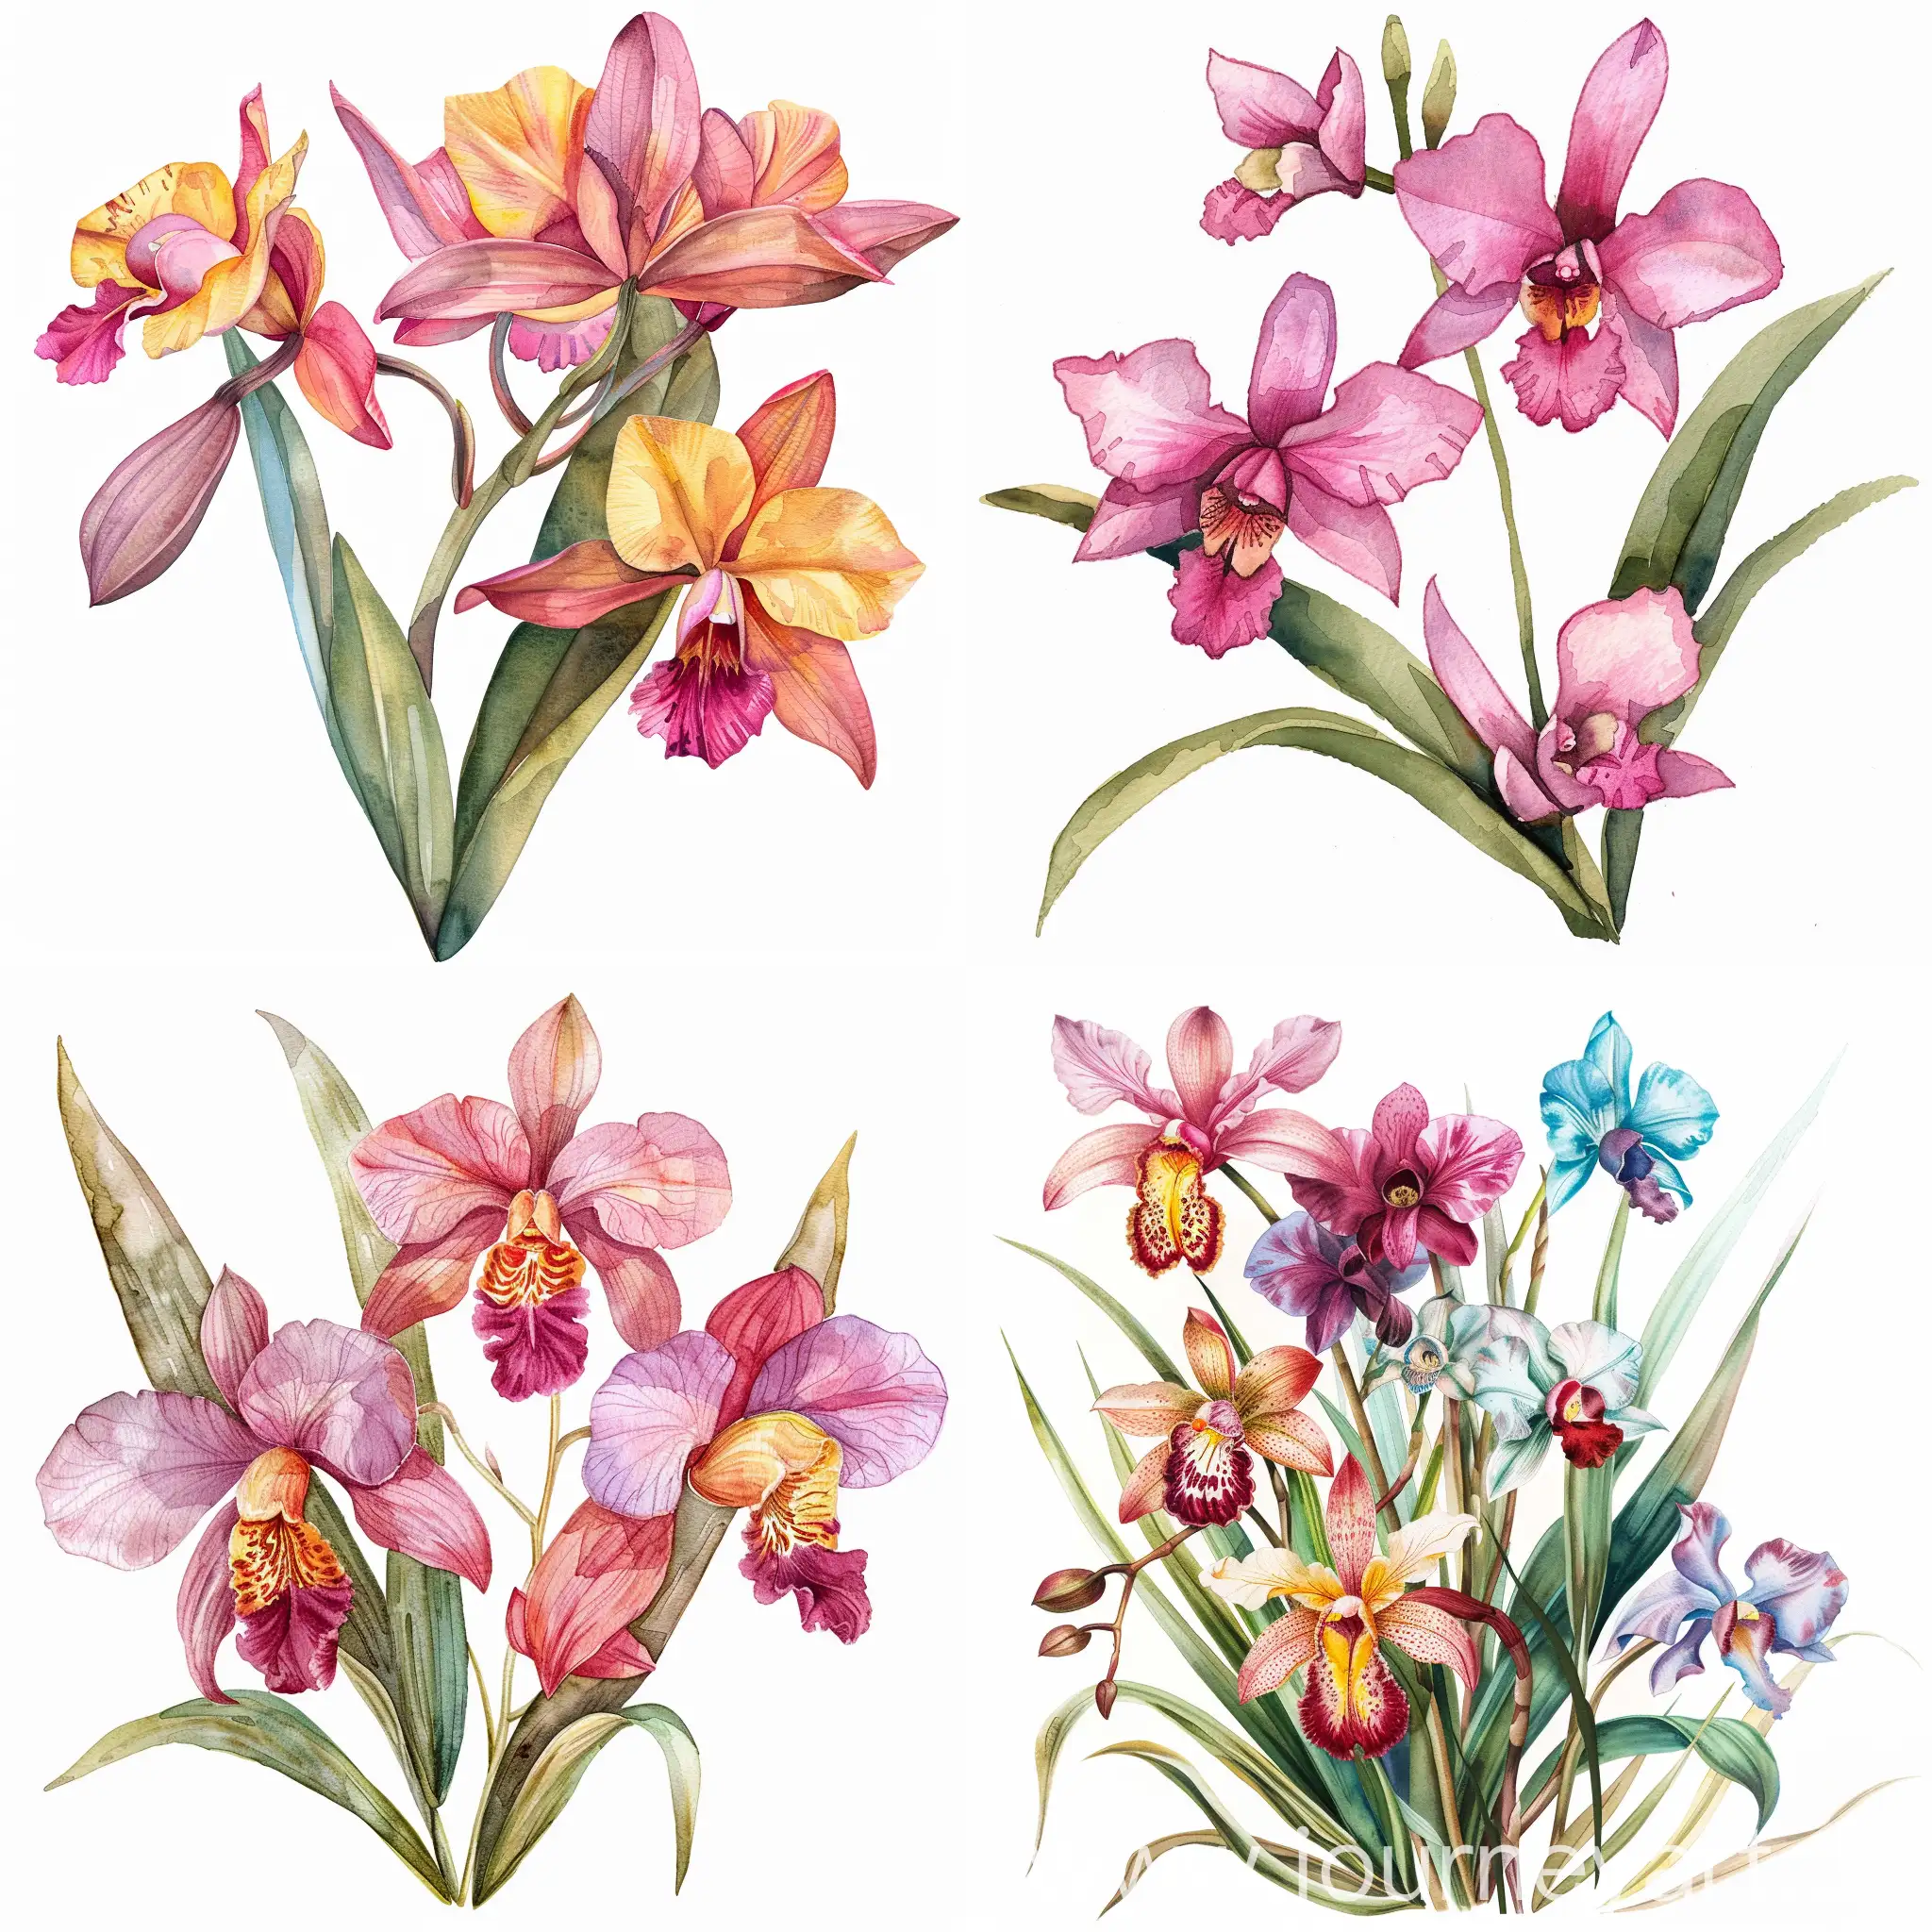 Vibrant-Colombian-Orchids-Watercolor-Painting-on-White-Background